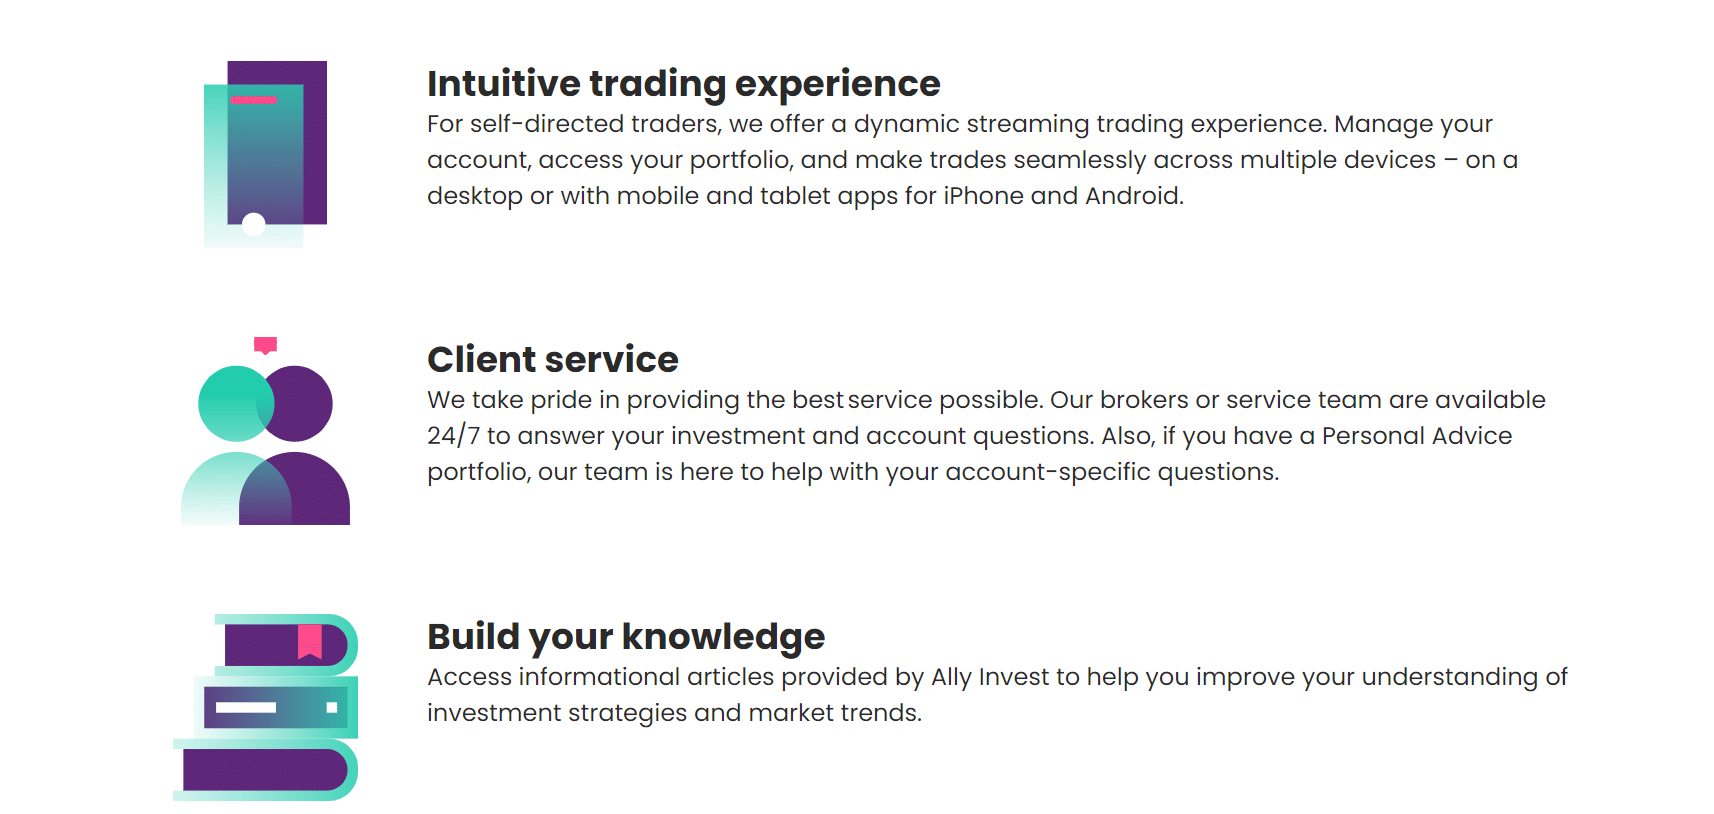 ally invest stock trading platform with tradingview